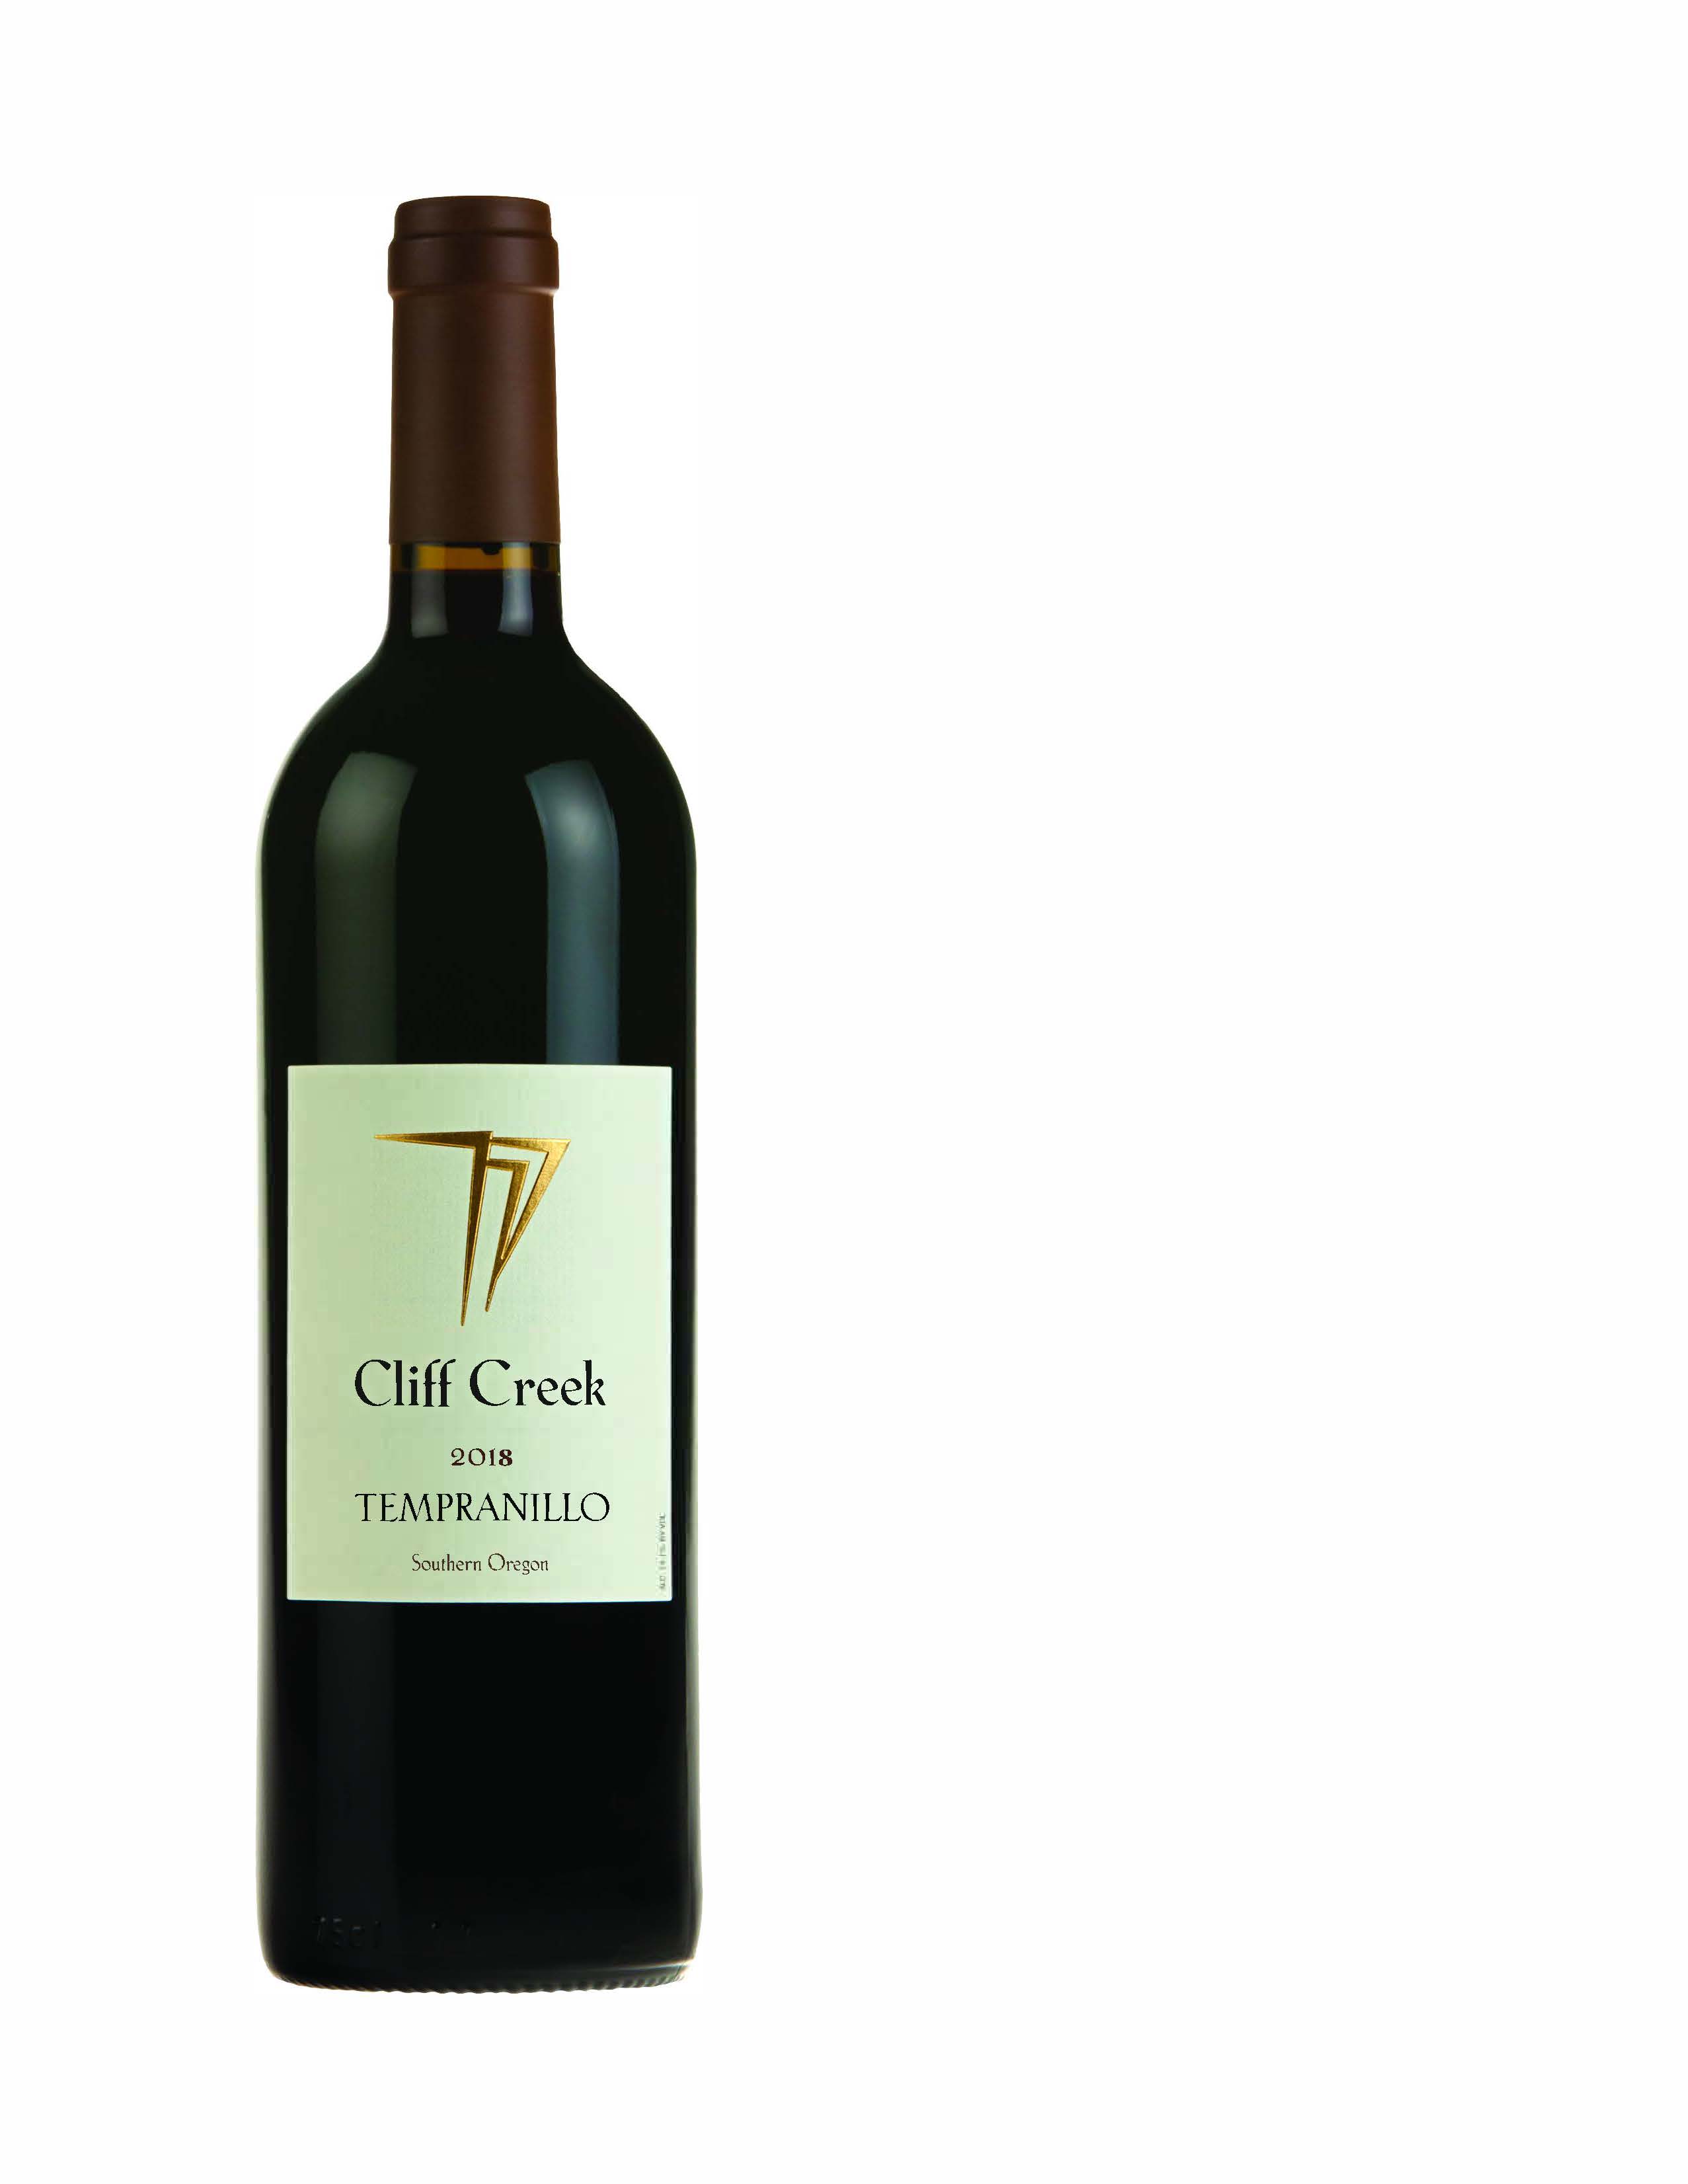 Product Image for 2018 Tempranillo